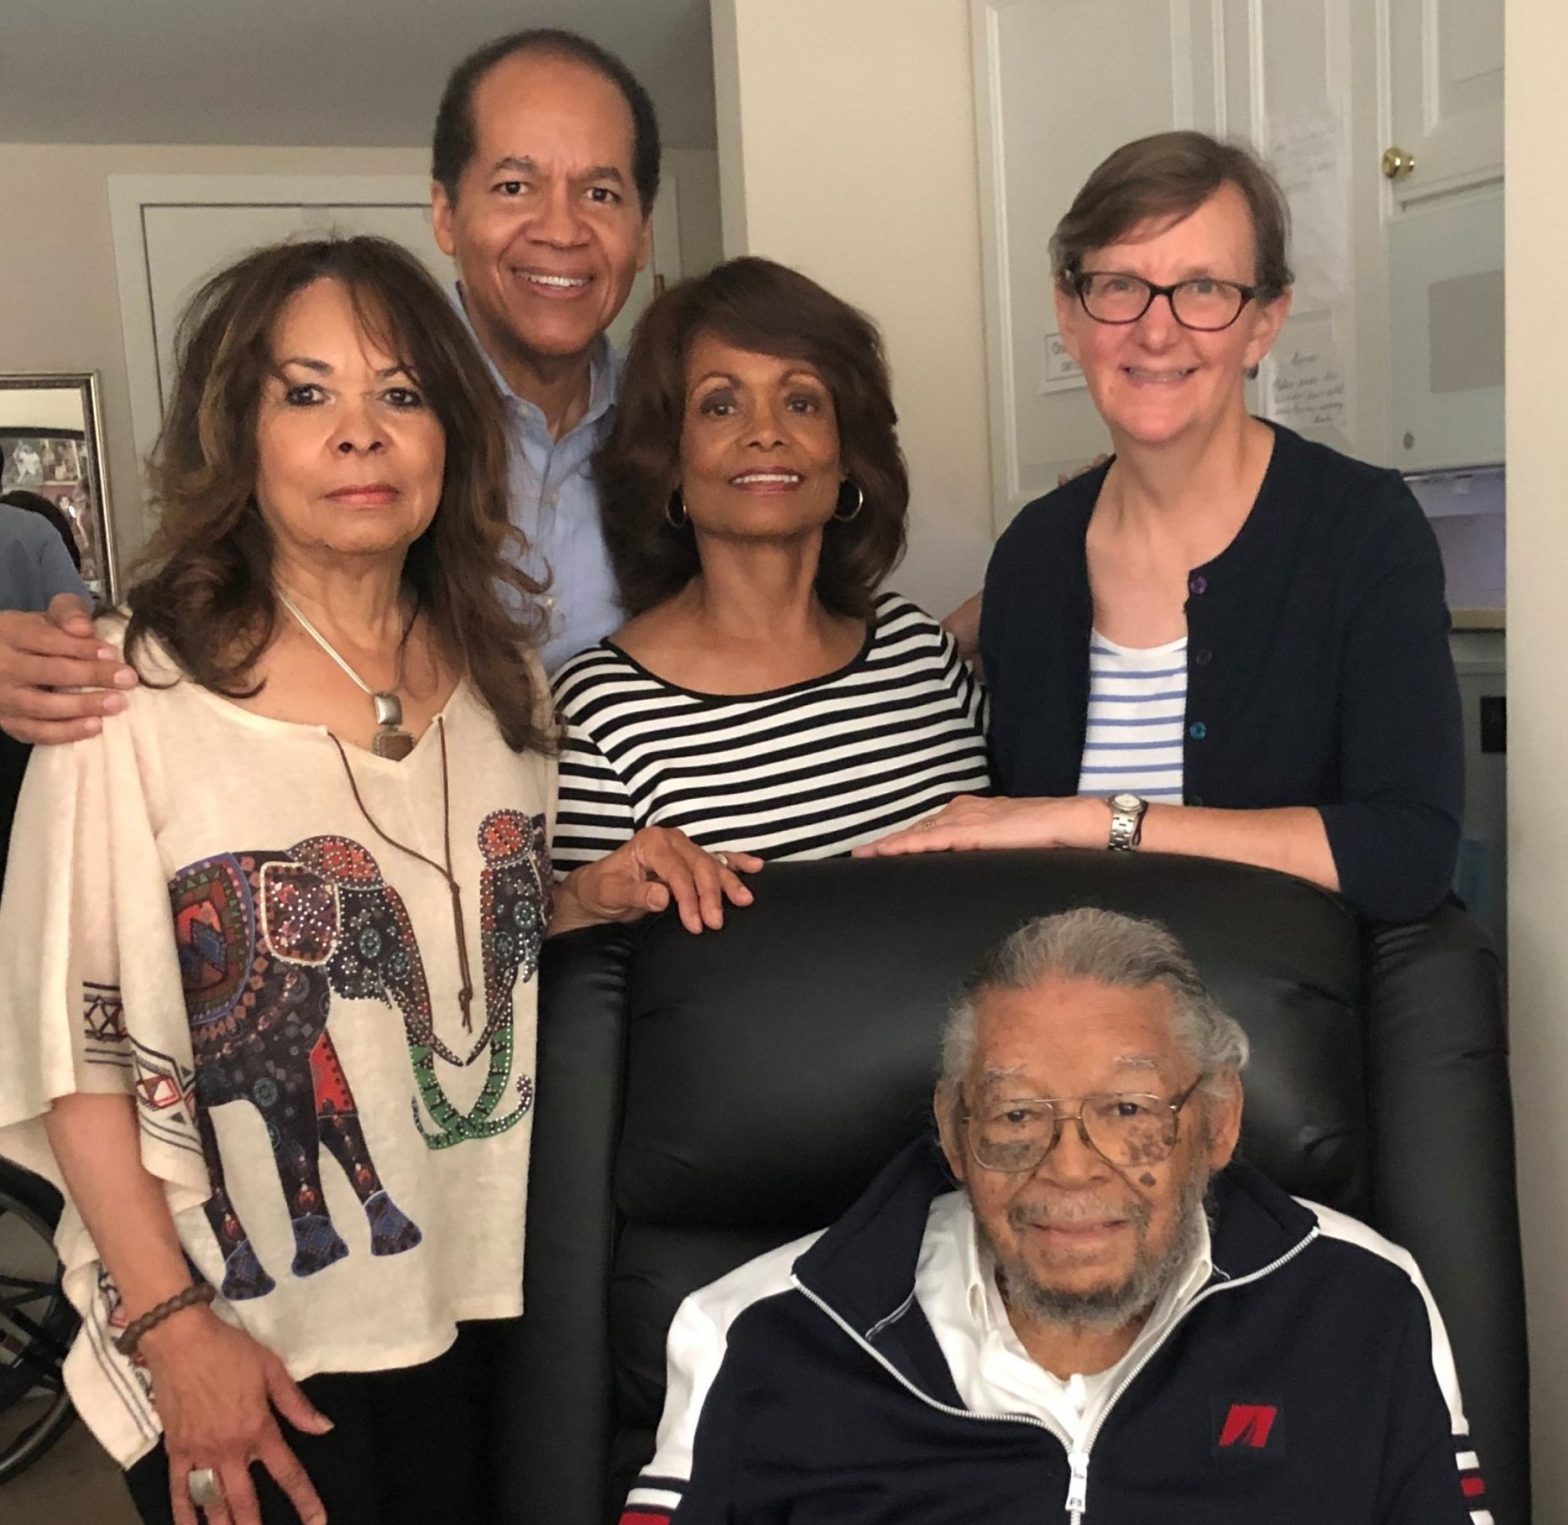 Client Nelson Henry (seated) with family and LAAW attorney Elizabeth Kristen